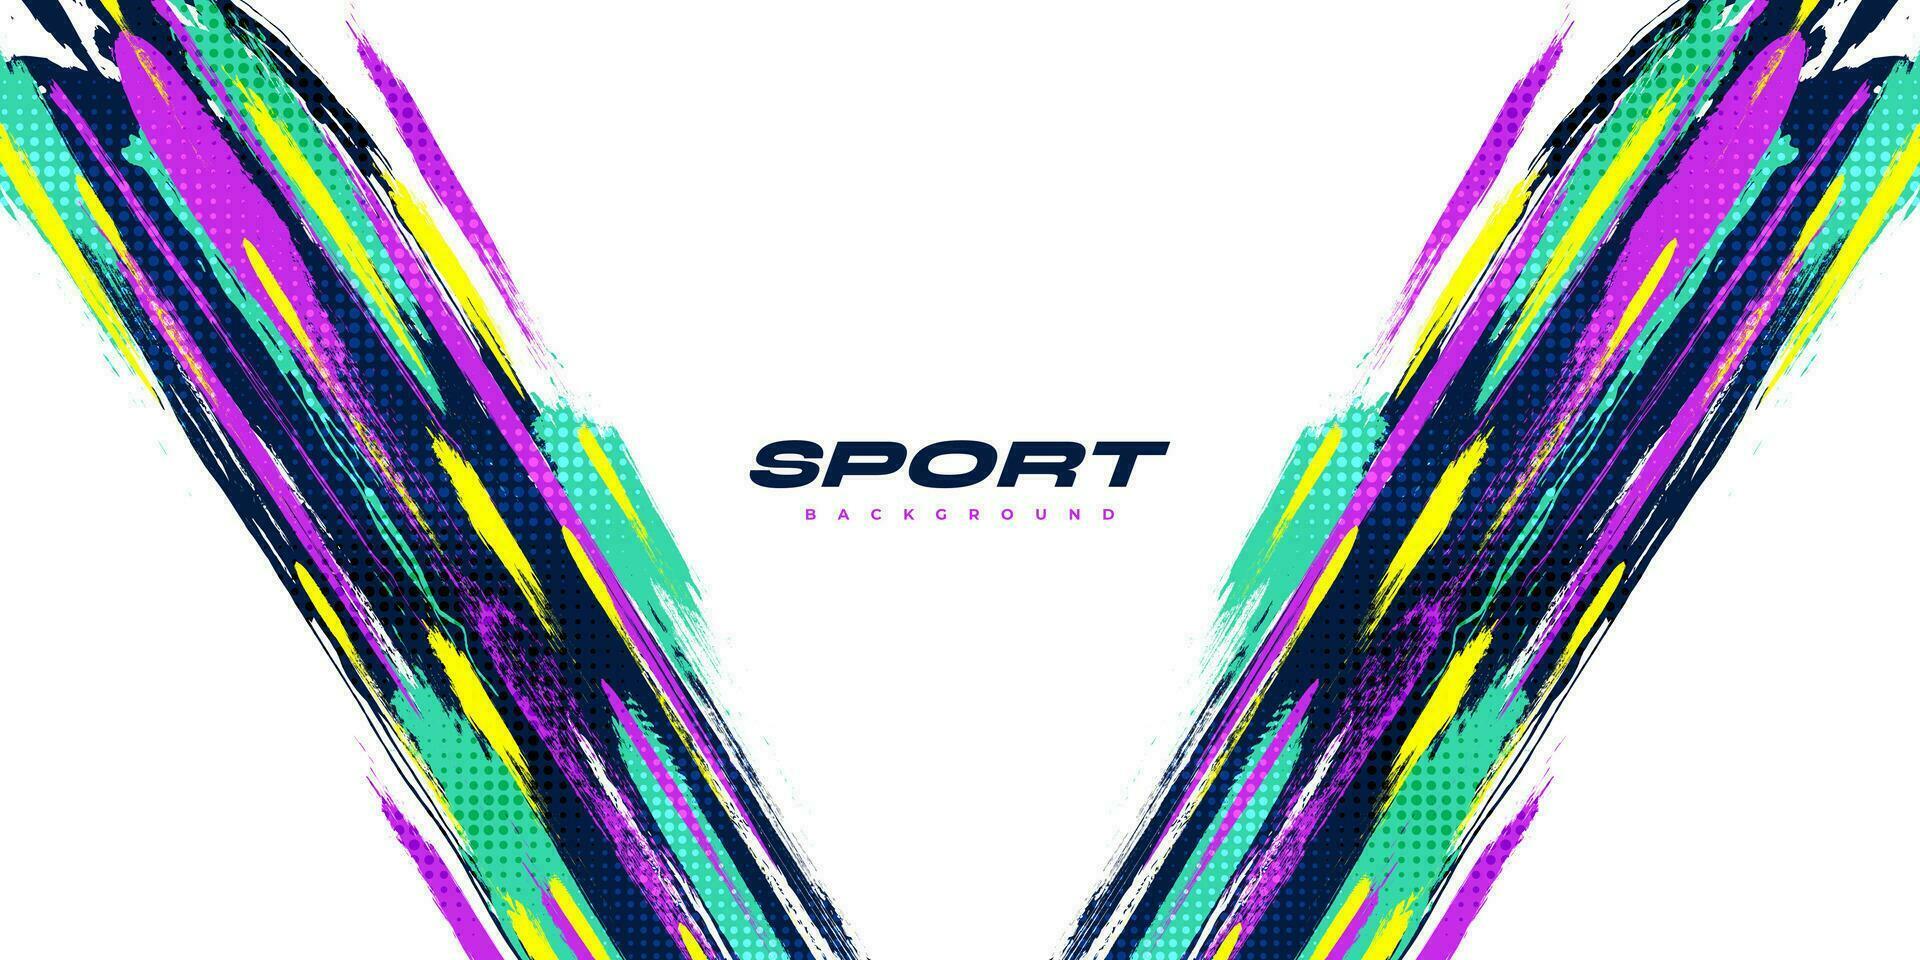 Sport Background with Colorful Brush Style vector